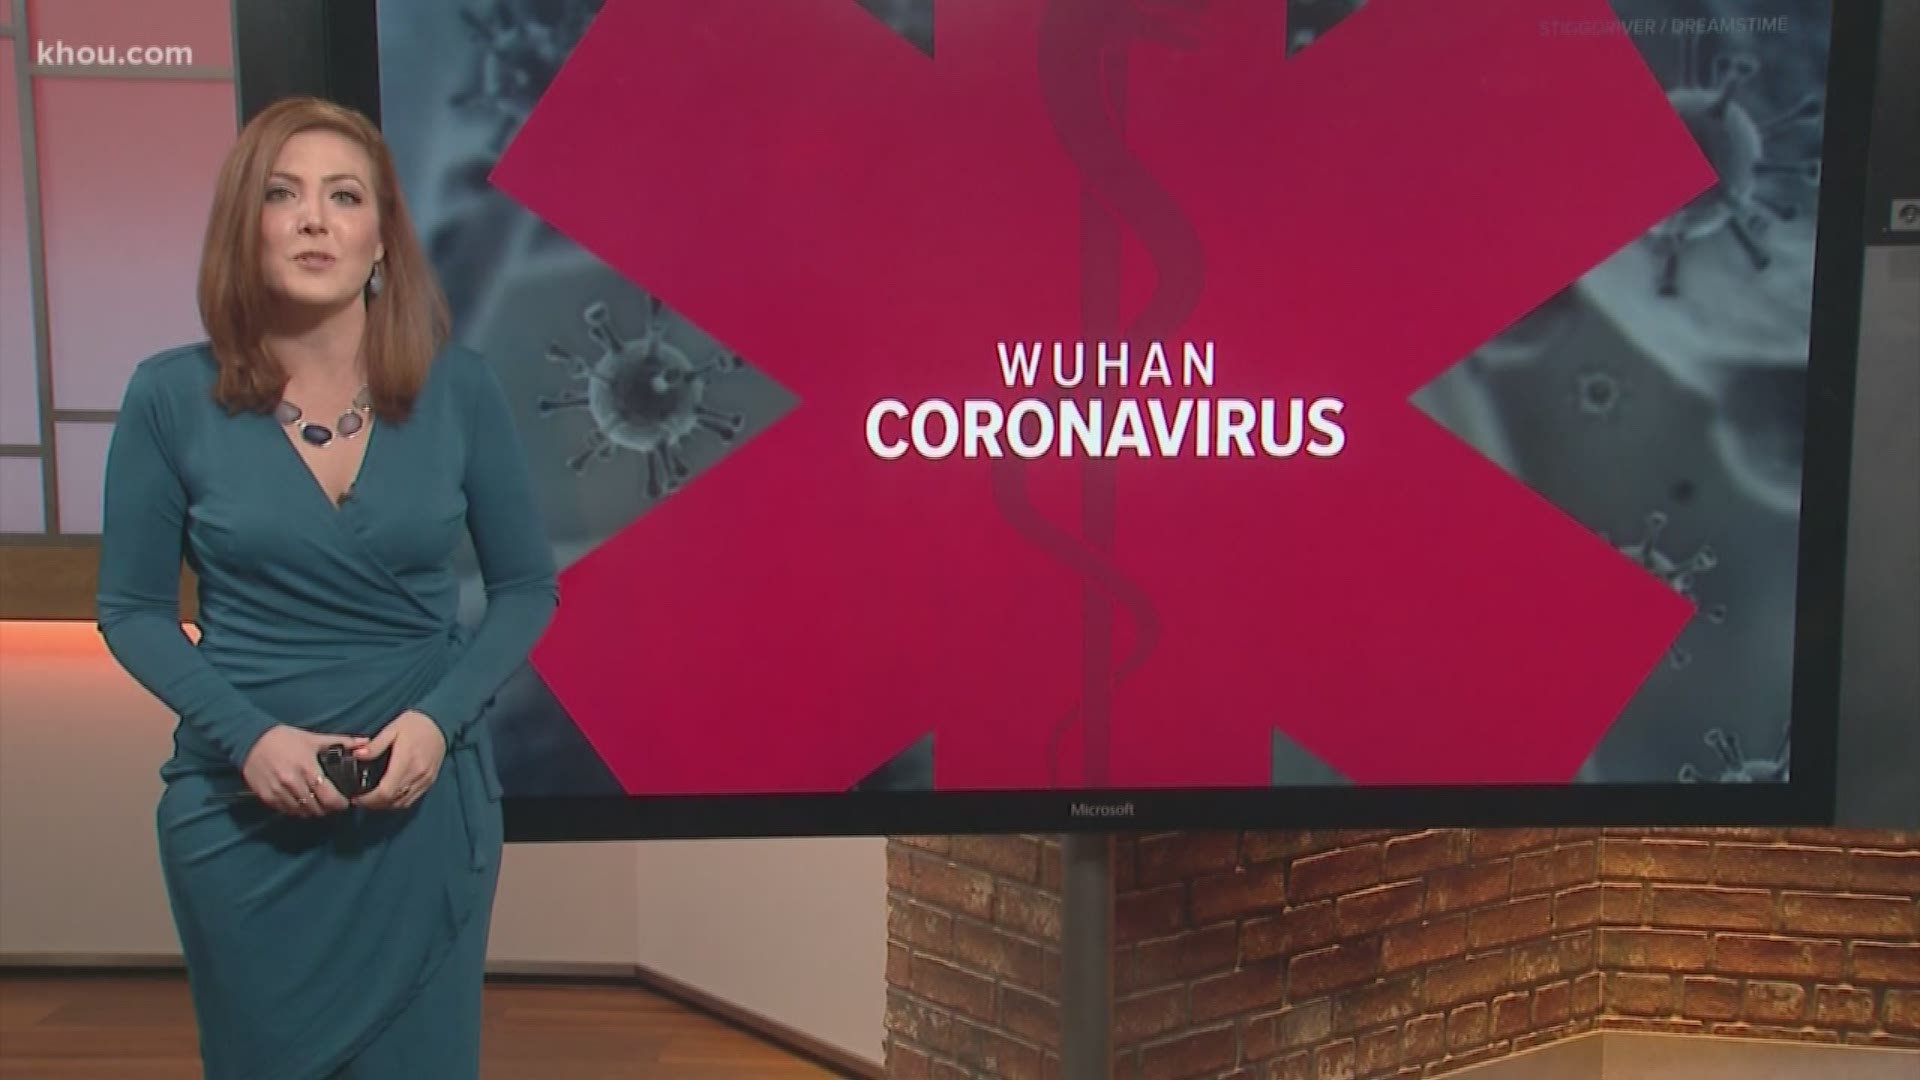 We know there are a lot of questions about the Wuhan coronavirus. So we spoke to a doctor with UT Physicians to get those answers for you.